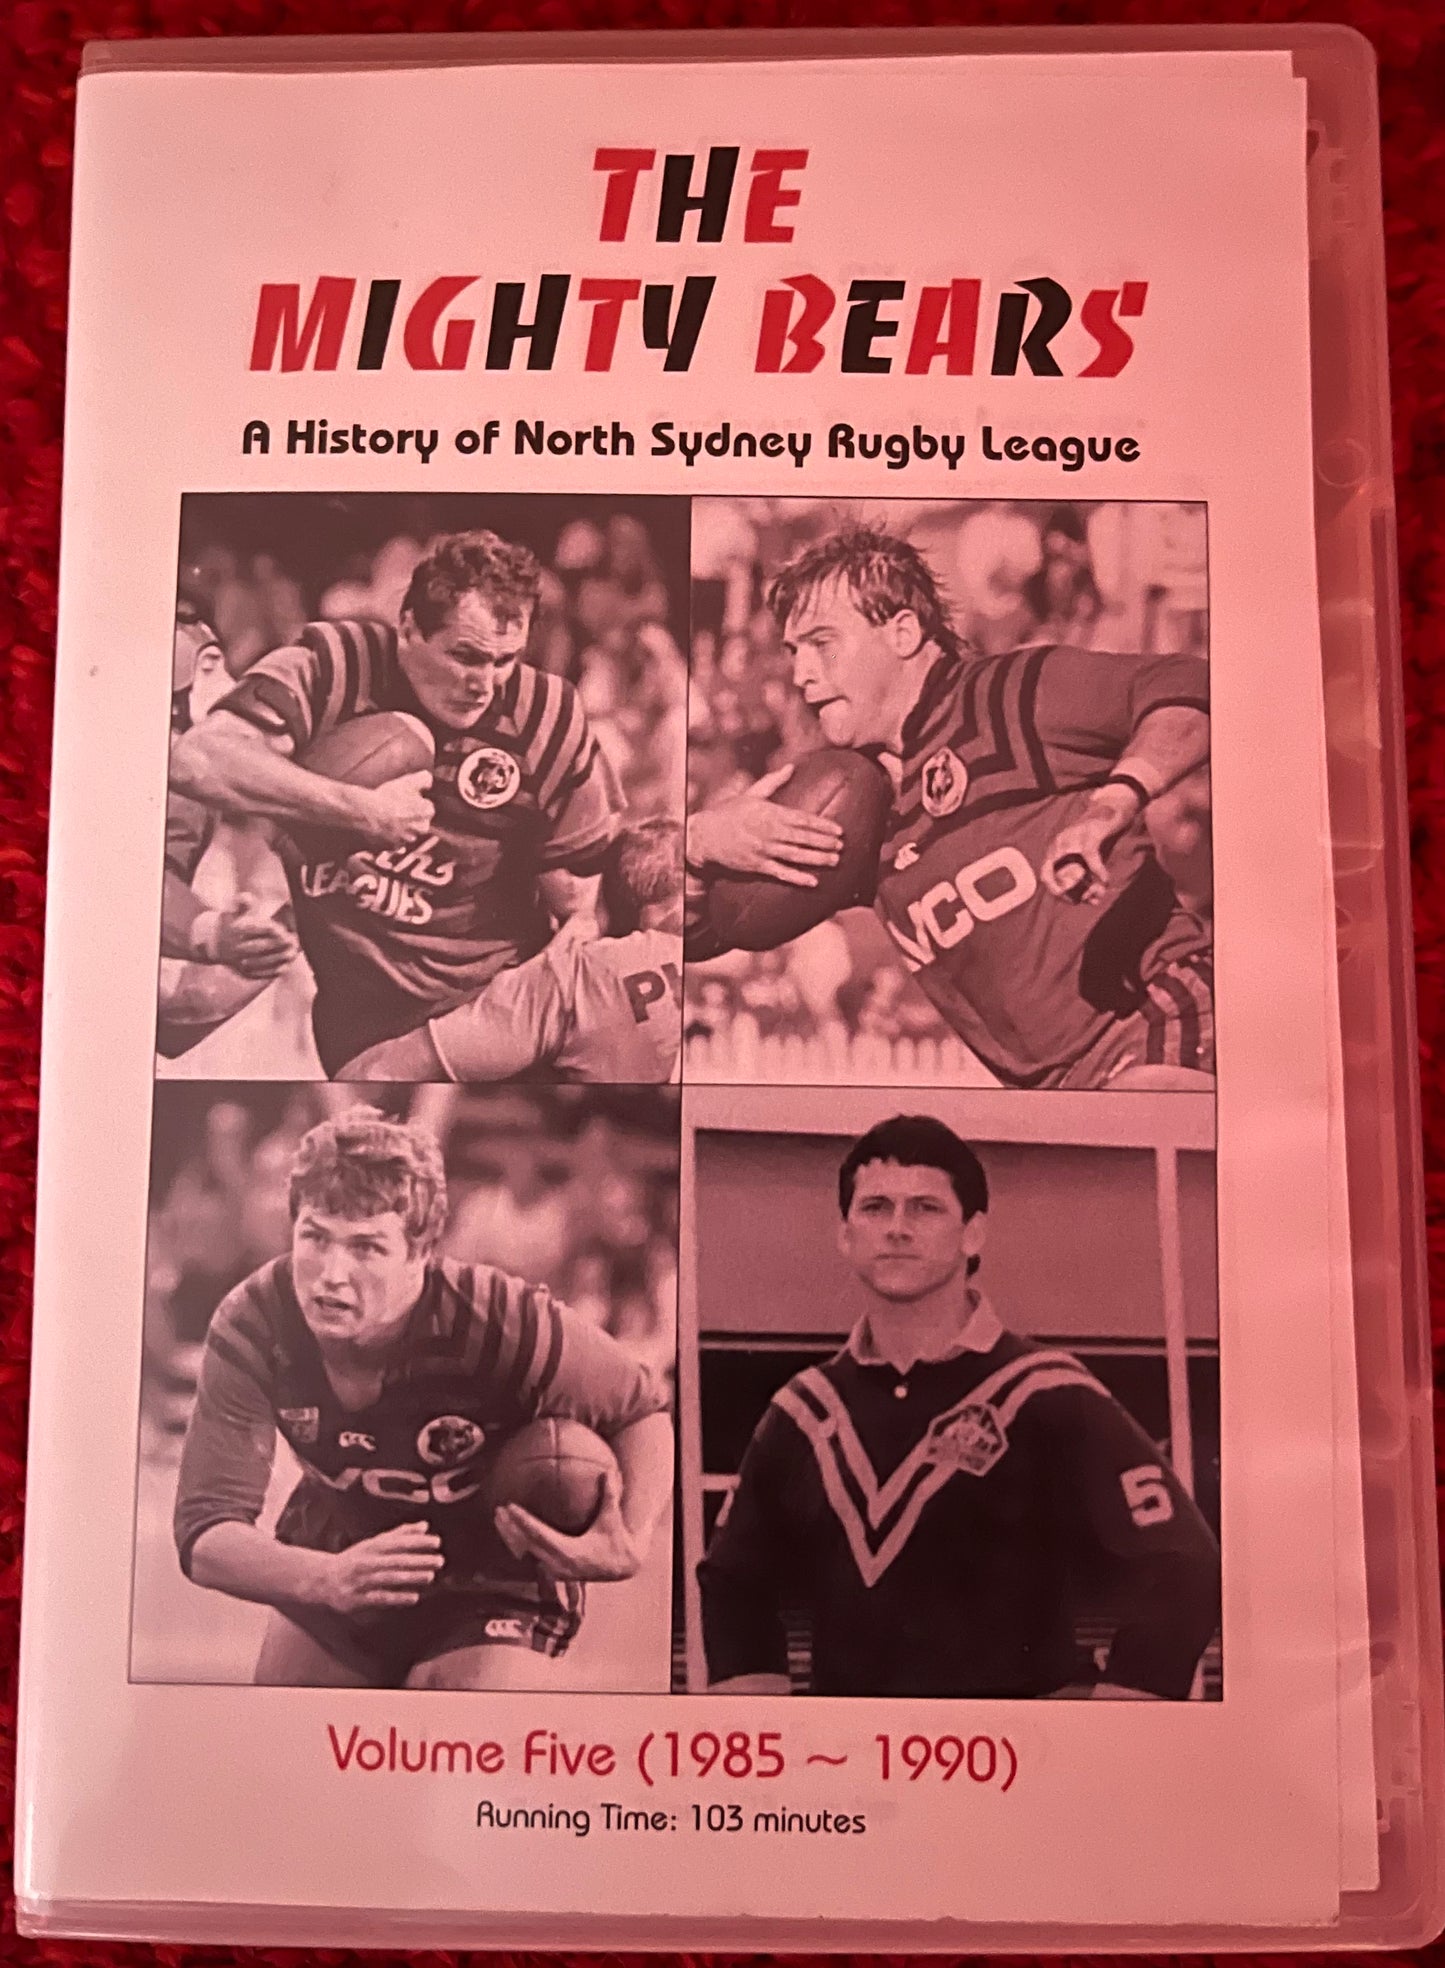 The Mighty Bears - Volume 5 (1985 - 1990)